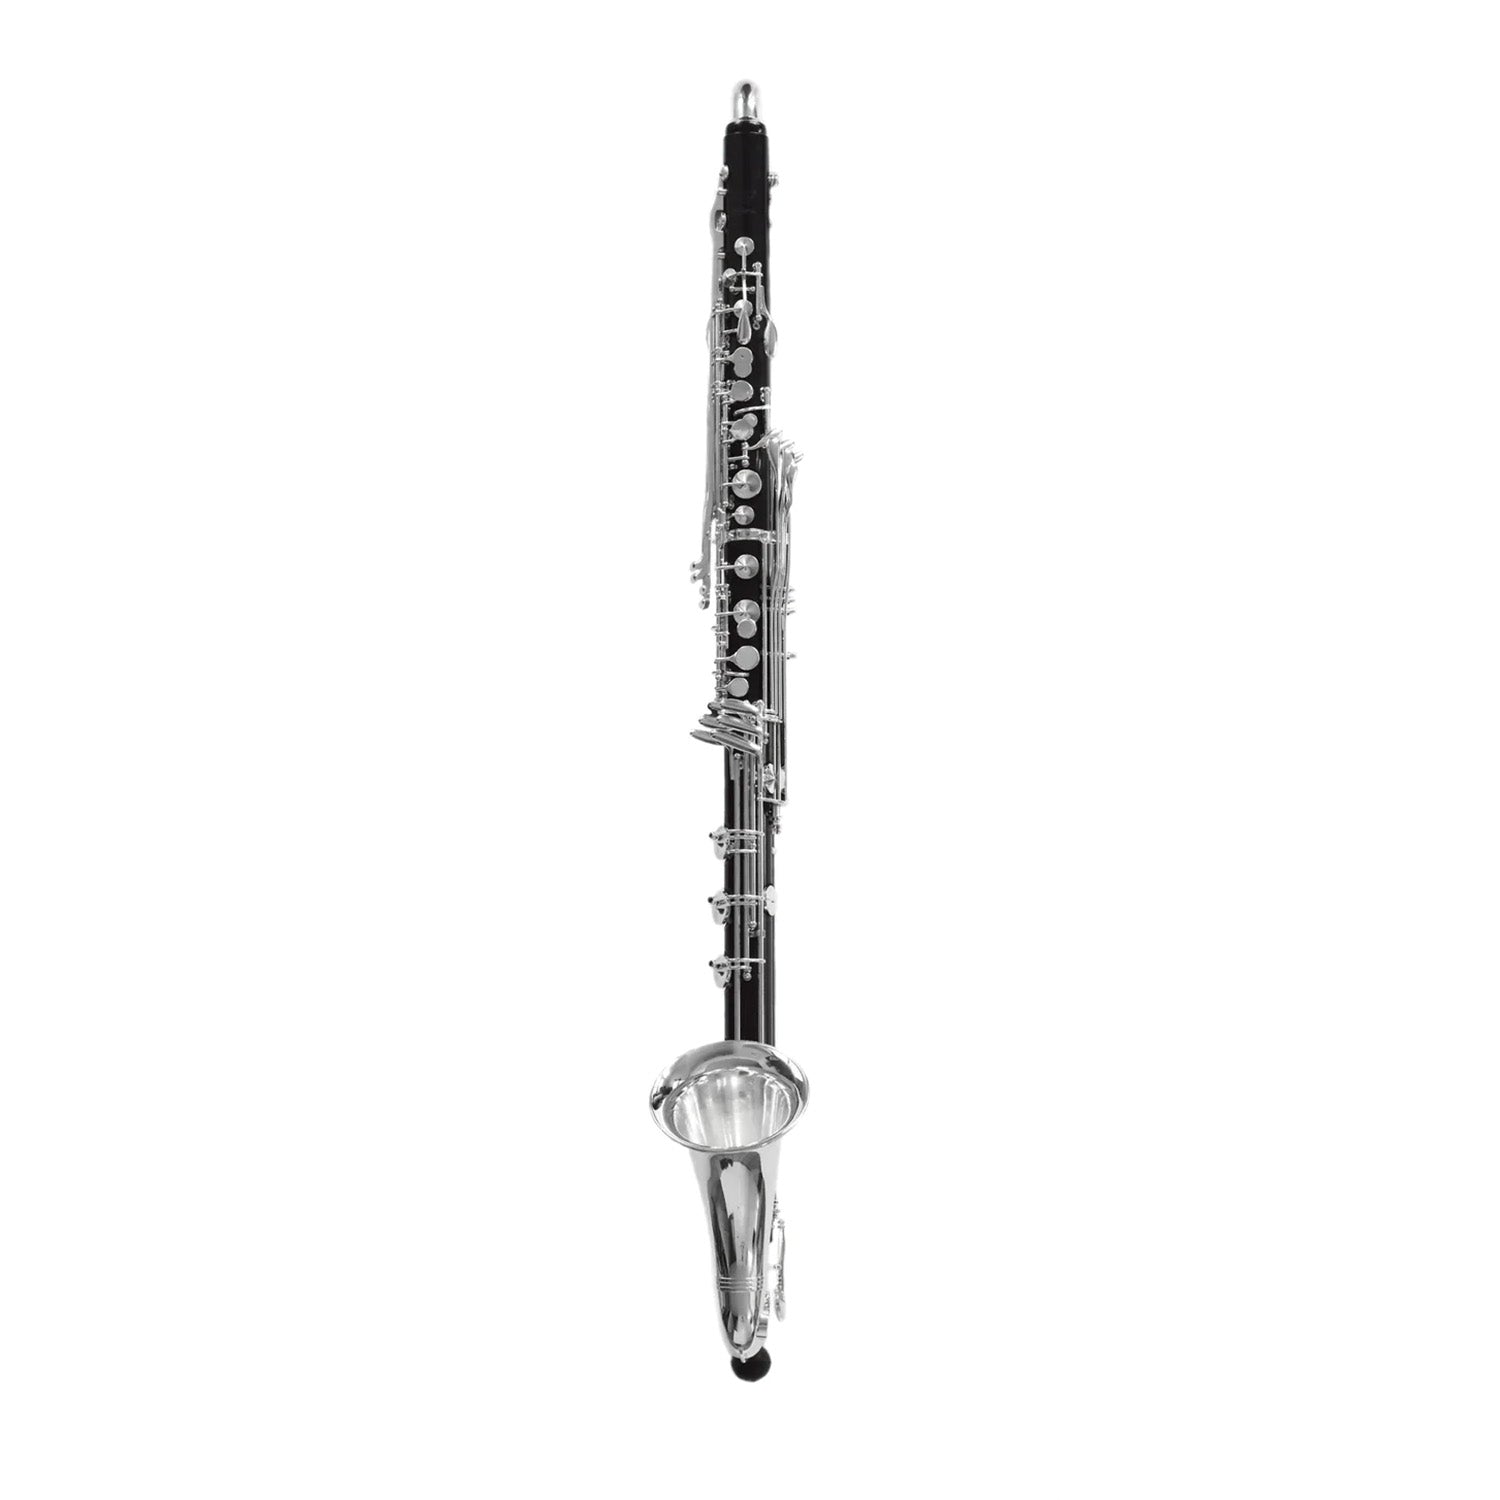 full length frontal shot of the entire bass clarinet assembled, against a white background